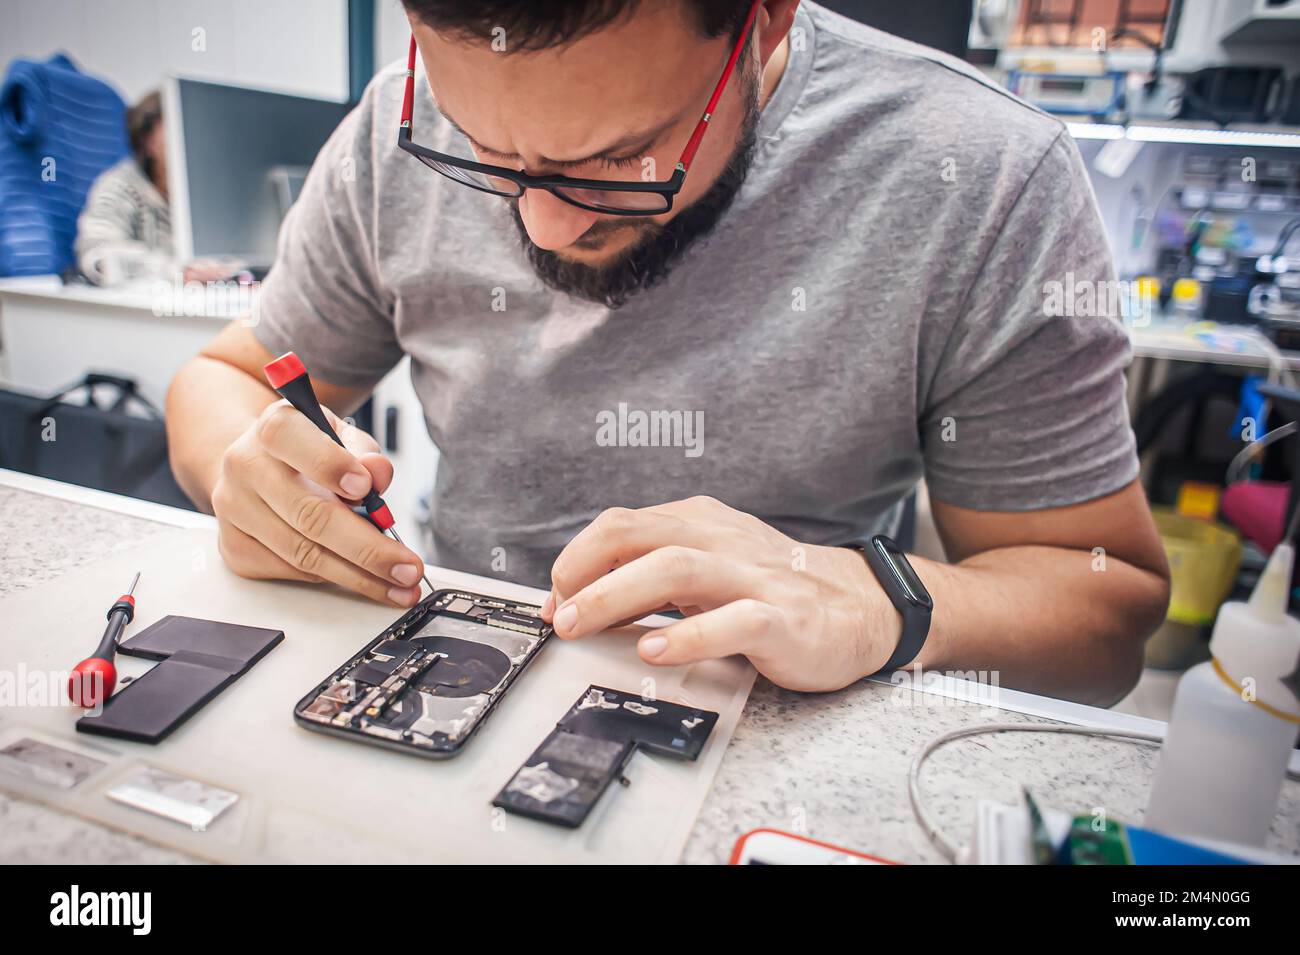 Workplace top view, close-up. Repairman disassembles smartphone with screwdriver in an electronics repair shop. Stock Photo